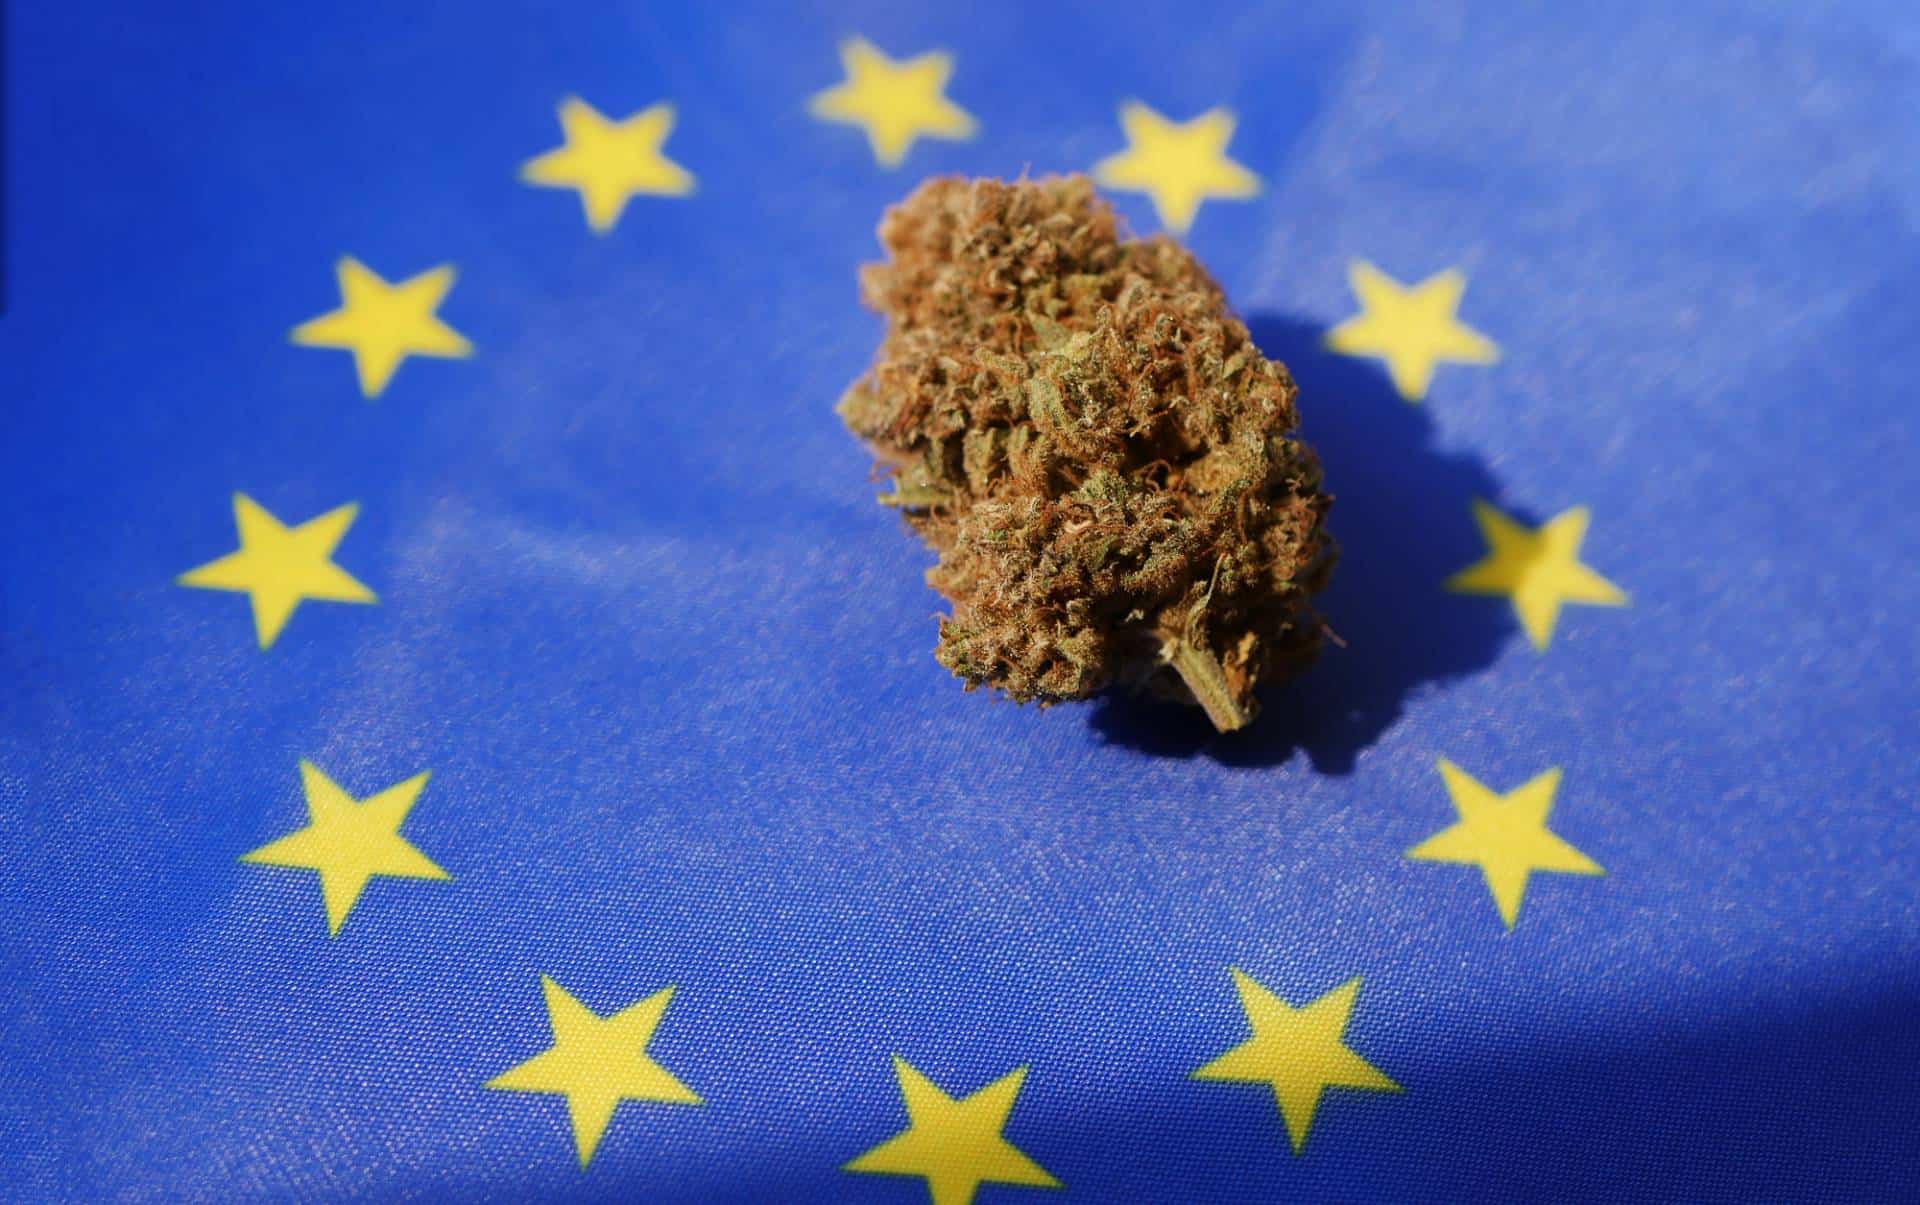 What countries have legalized certain drugs in the EU and why?